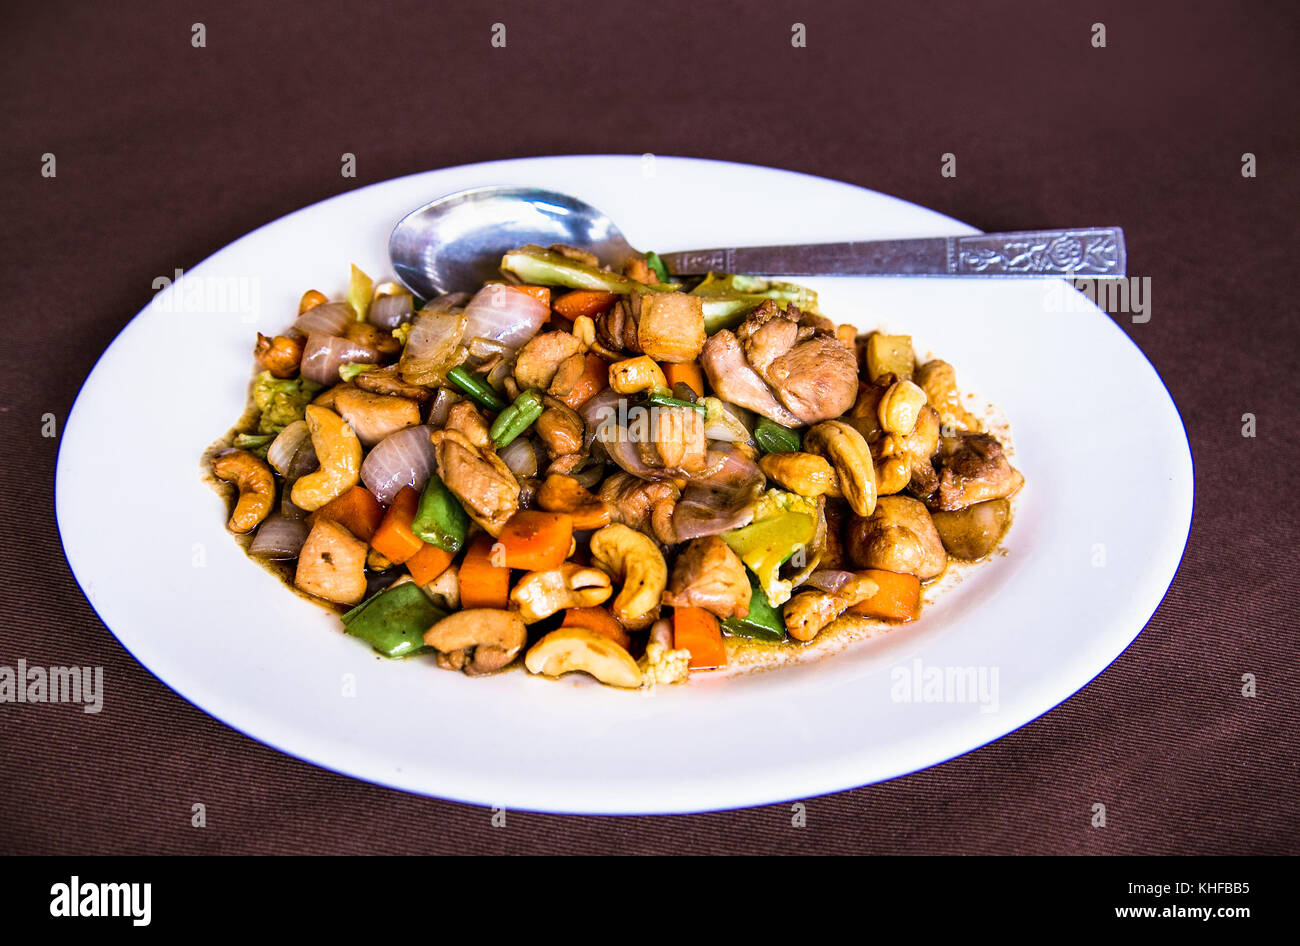 Plates of Asian food - chicken with vegetables, Myanmar. (Burama) Stock Photo